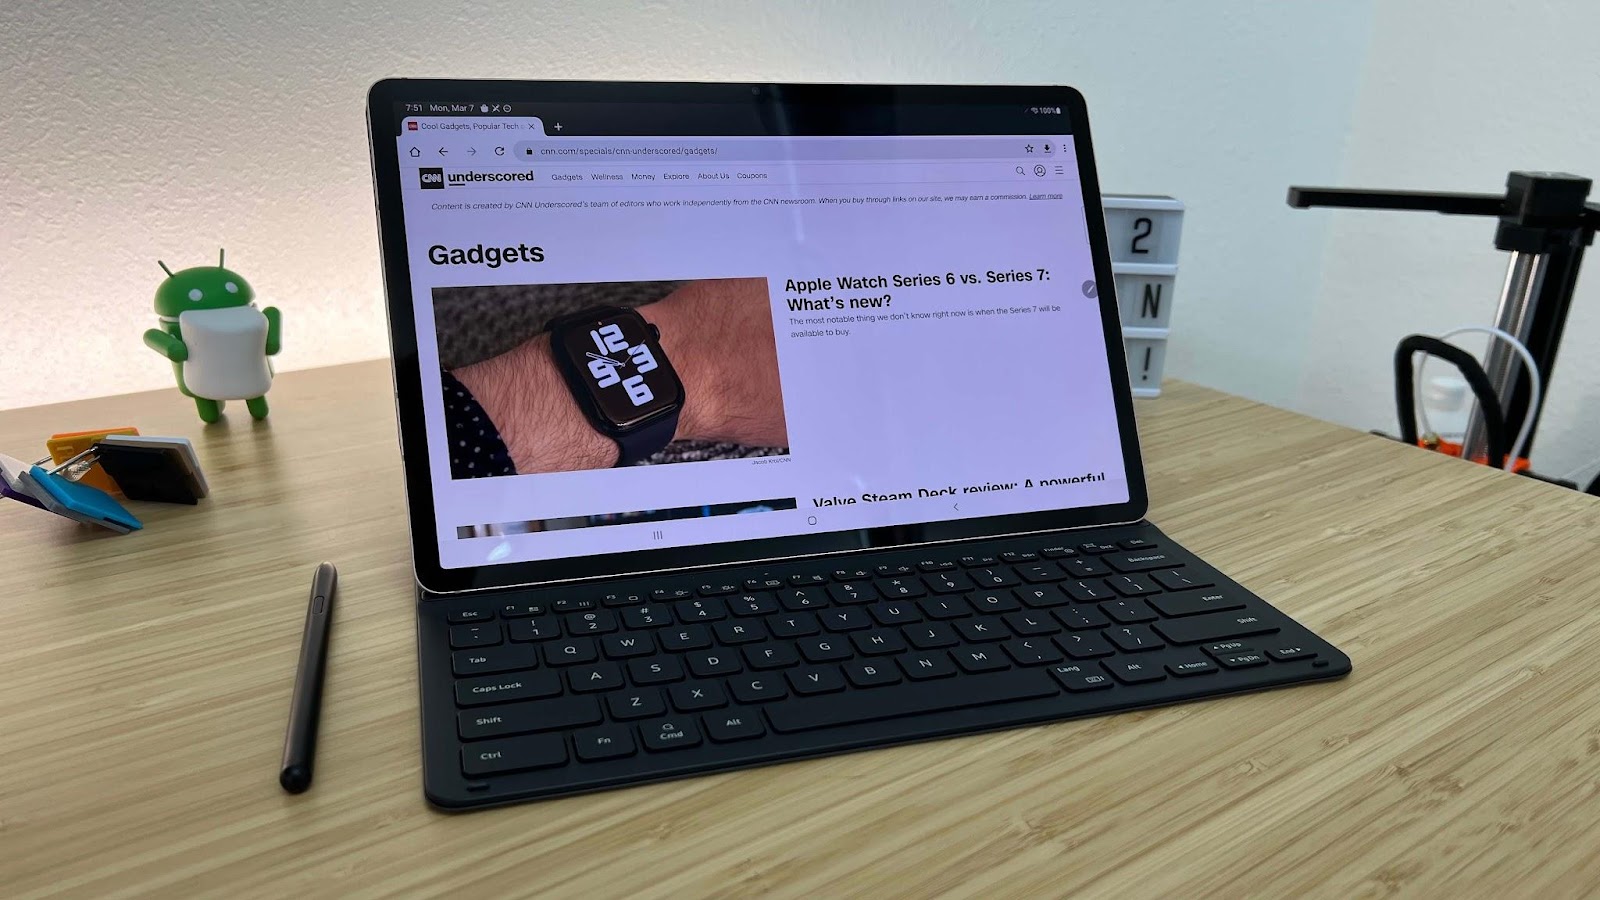 This image shows the Samsung Galaxy Tab S8+ on the table.